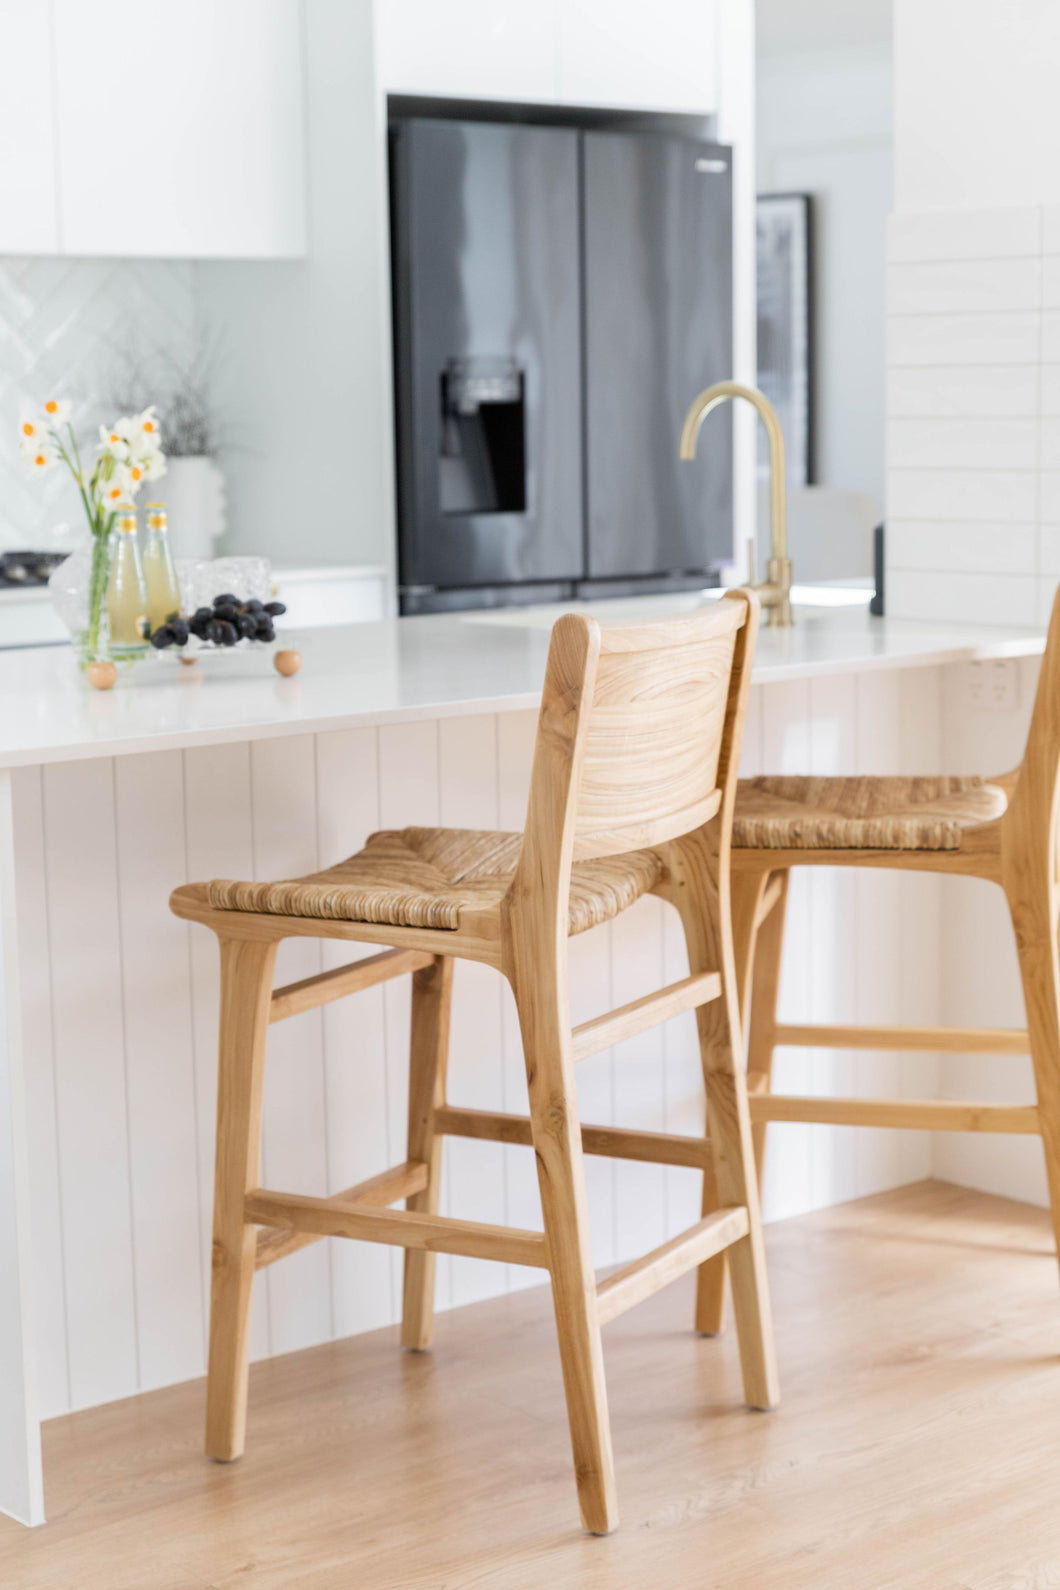 Henderson seagrass counter stool (pre-order available April)